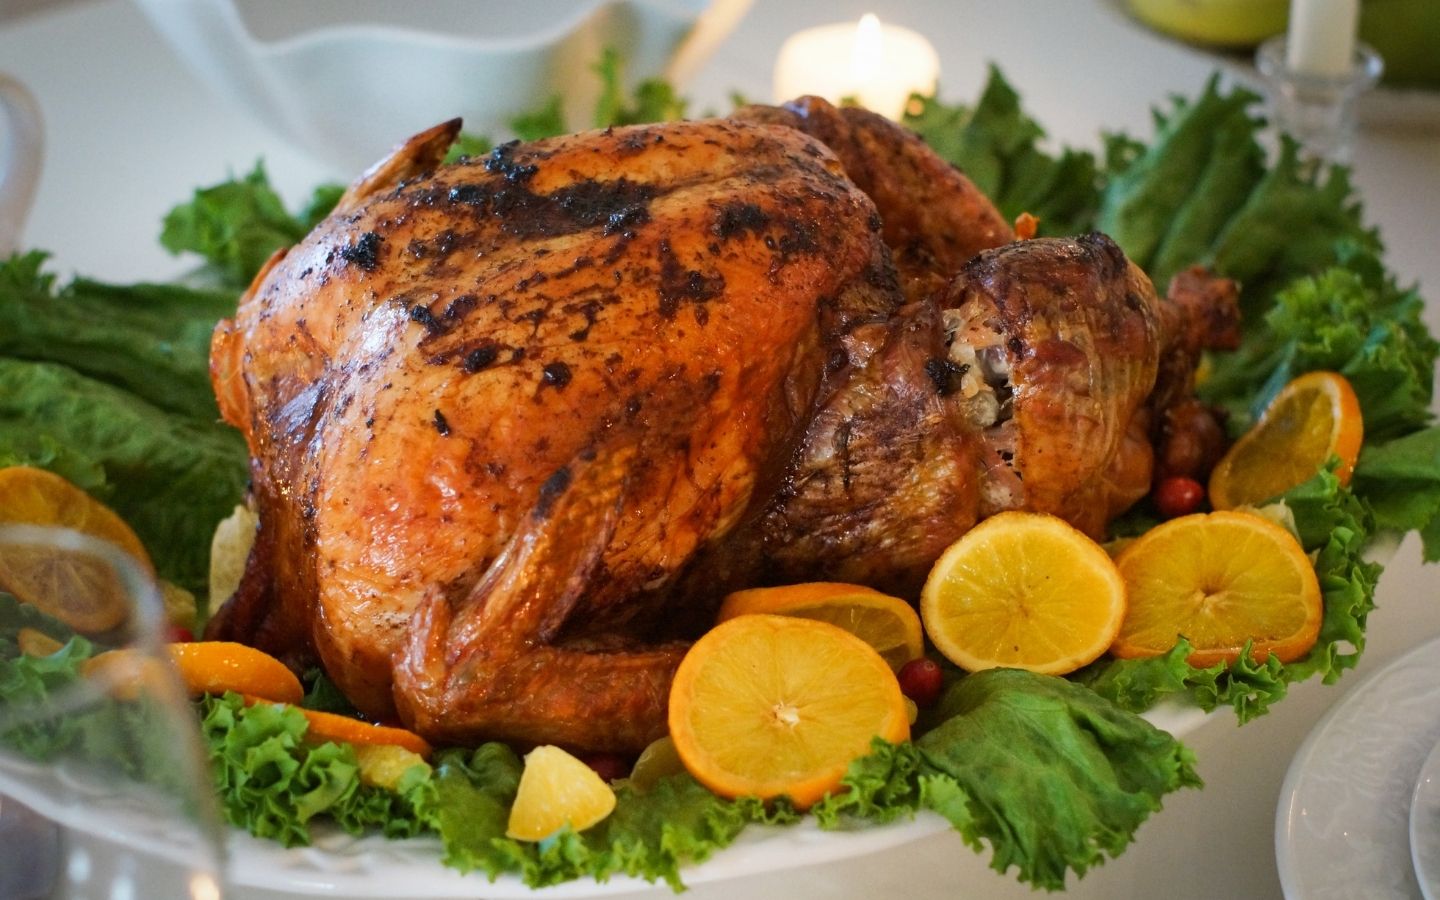 Golden brown, juicy roasted turkey surrounded by greenery and fresh orange slices